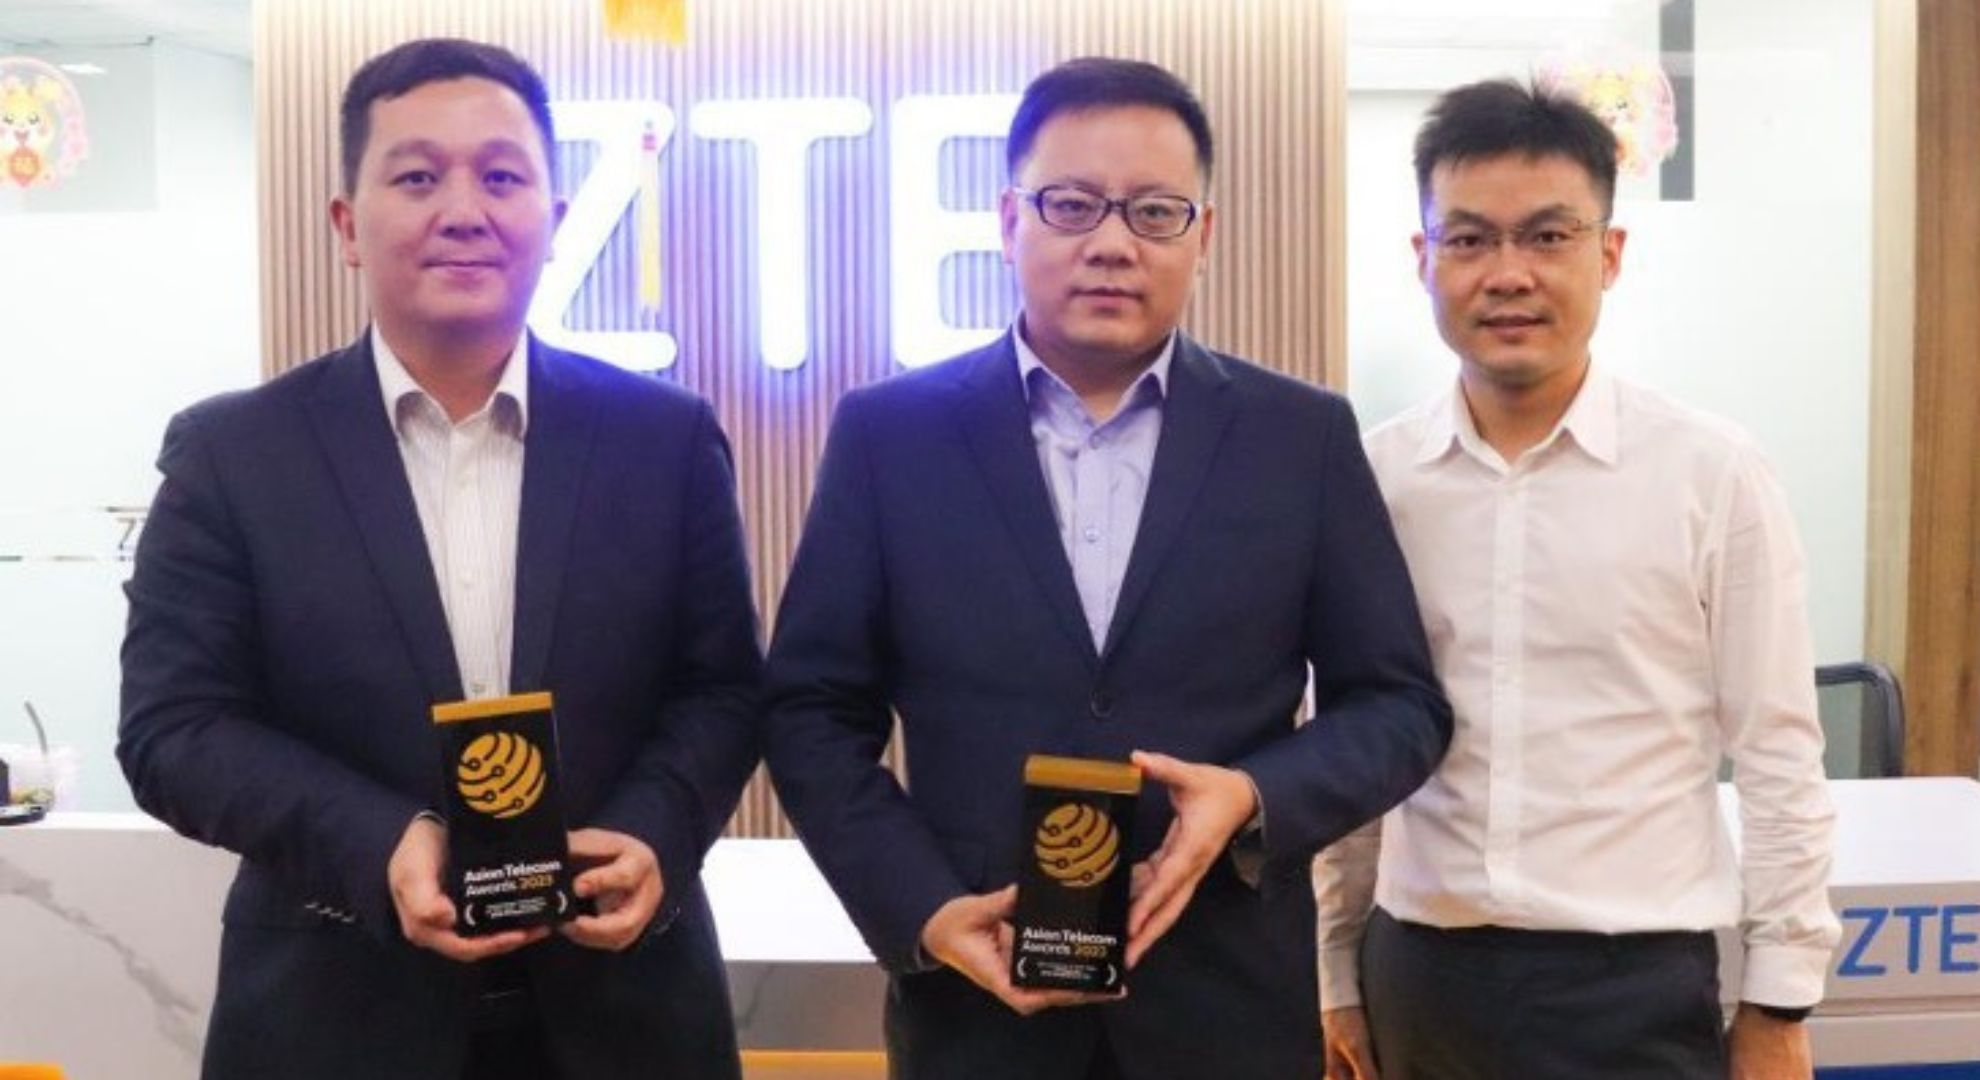 ZTE secures two major awards at the Asian Awards 2023